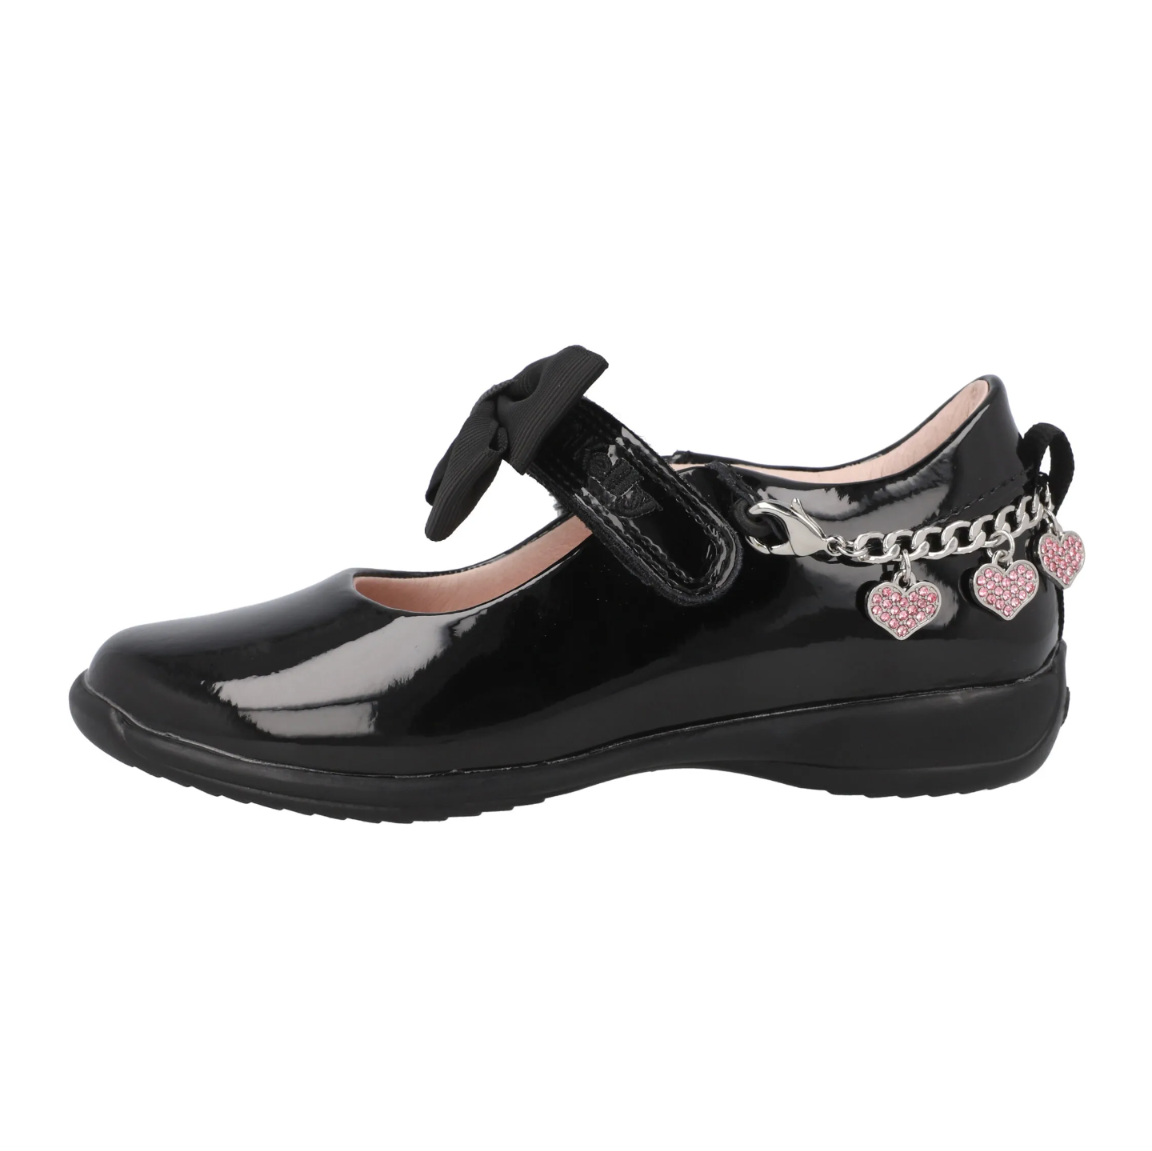 A girls Mary Jane school shoe by Lelli Kelly, style LK8224 Angel, in black patent leather with velcro fastening and detachable fabric bow and bracelet. Left side view.